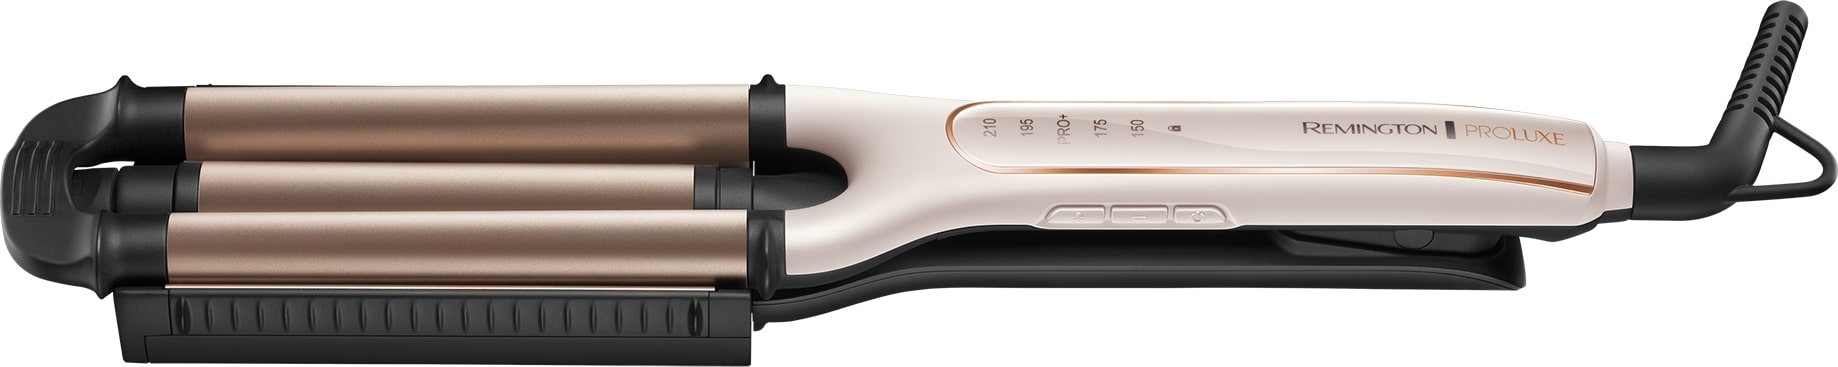 REMINGTON PRO-Luxe CI91AW 4-in-1 Adjustable Waver